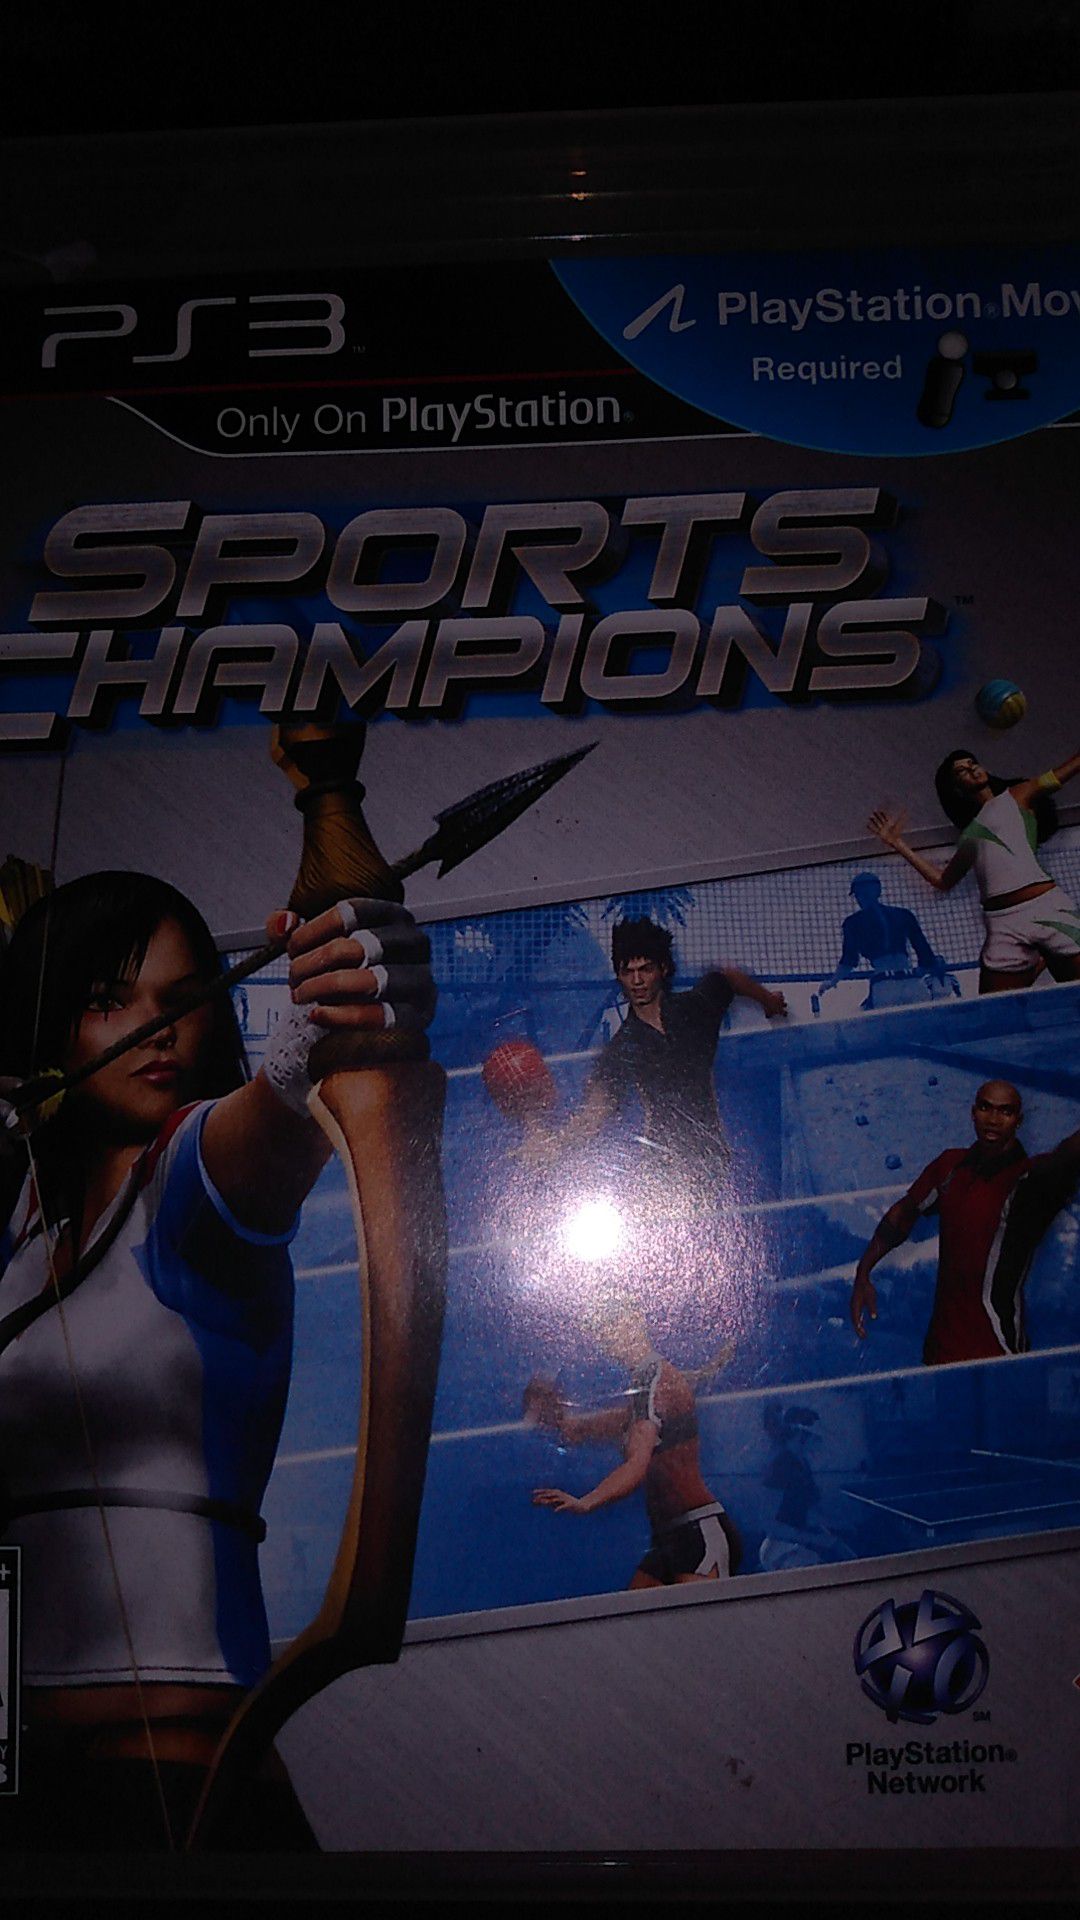 Ps3 sports champion requires camera and controller